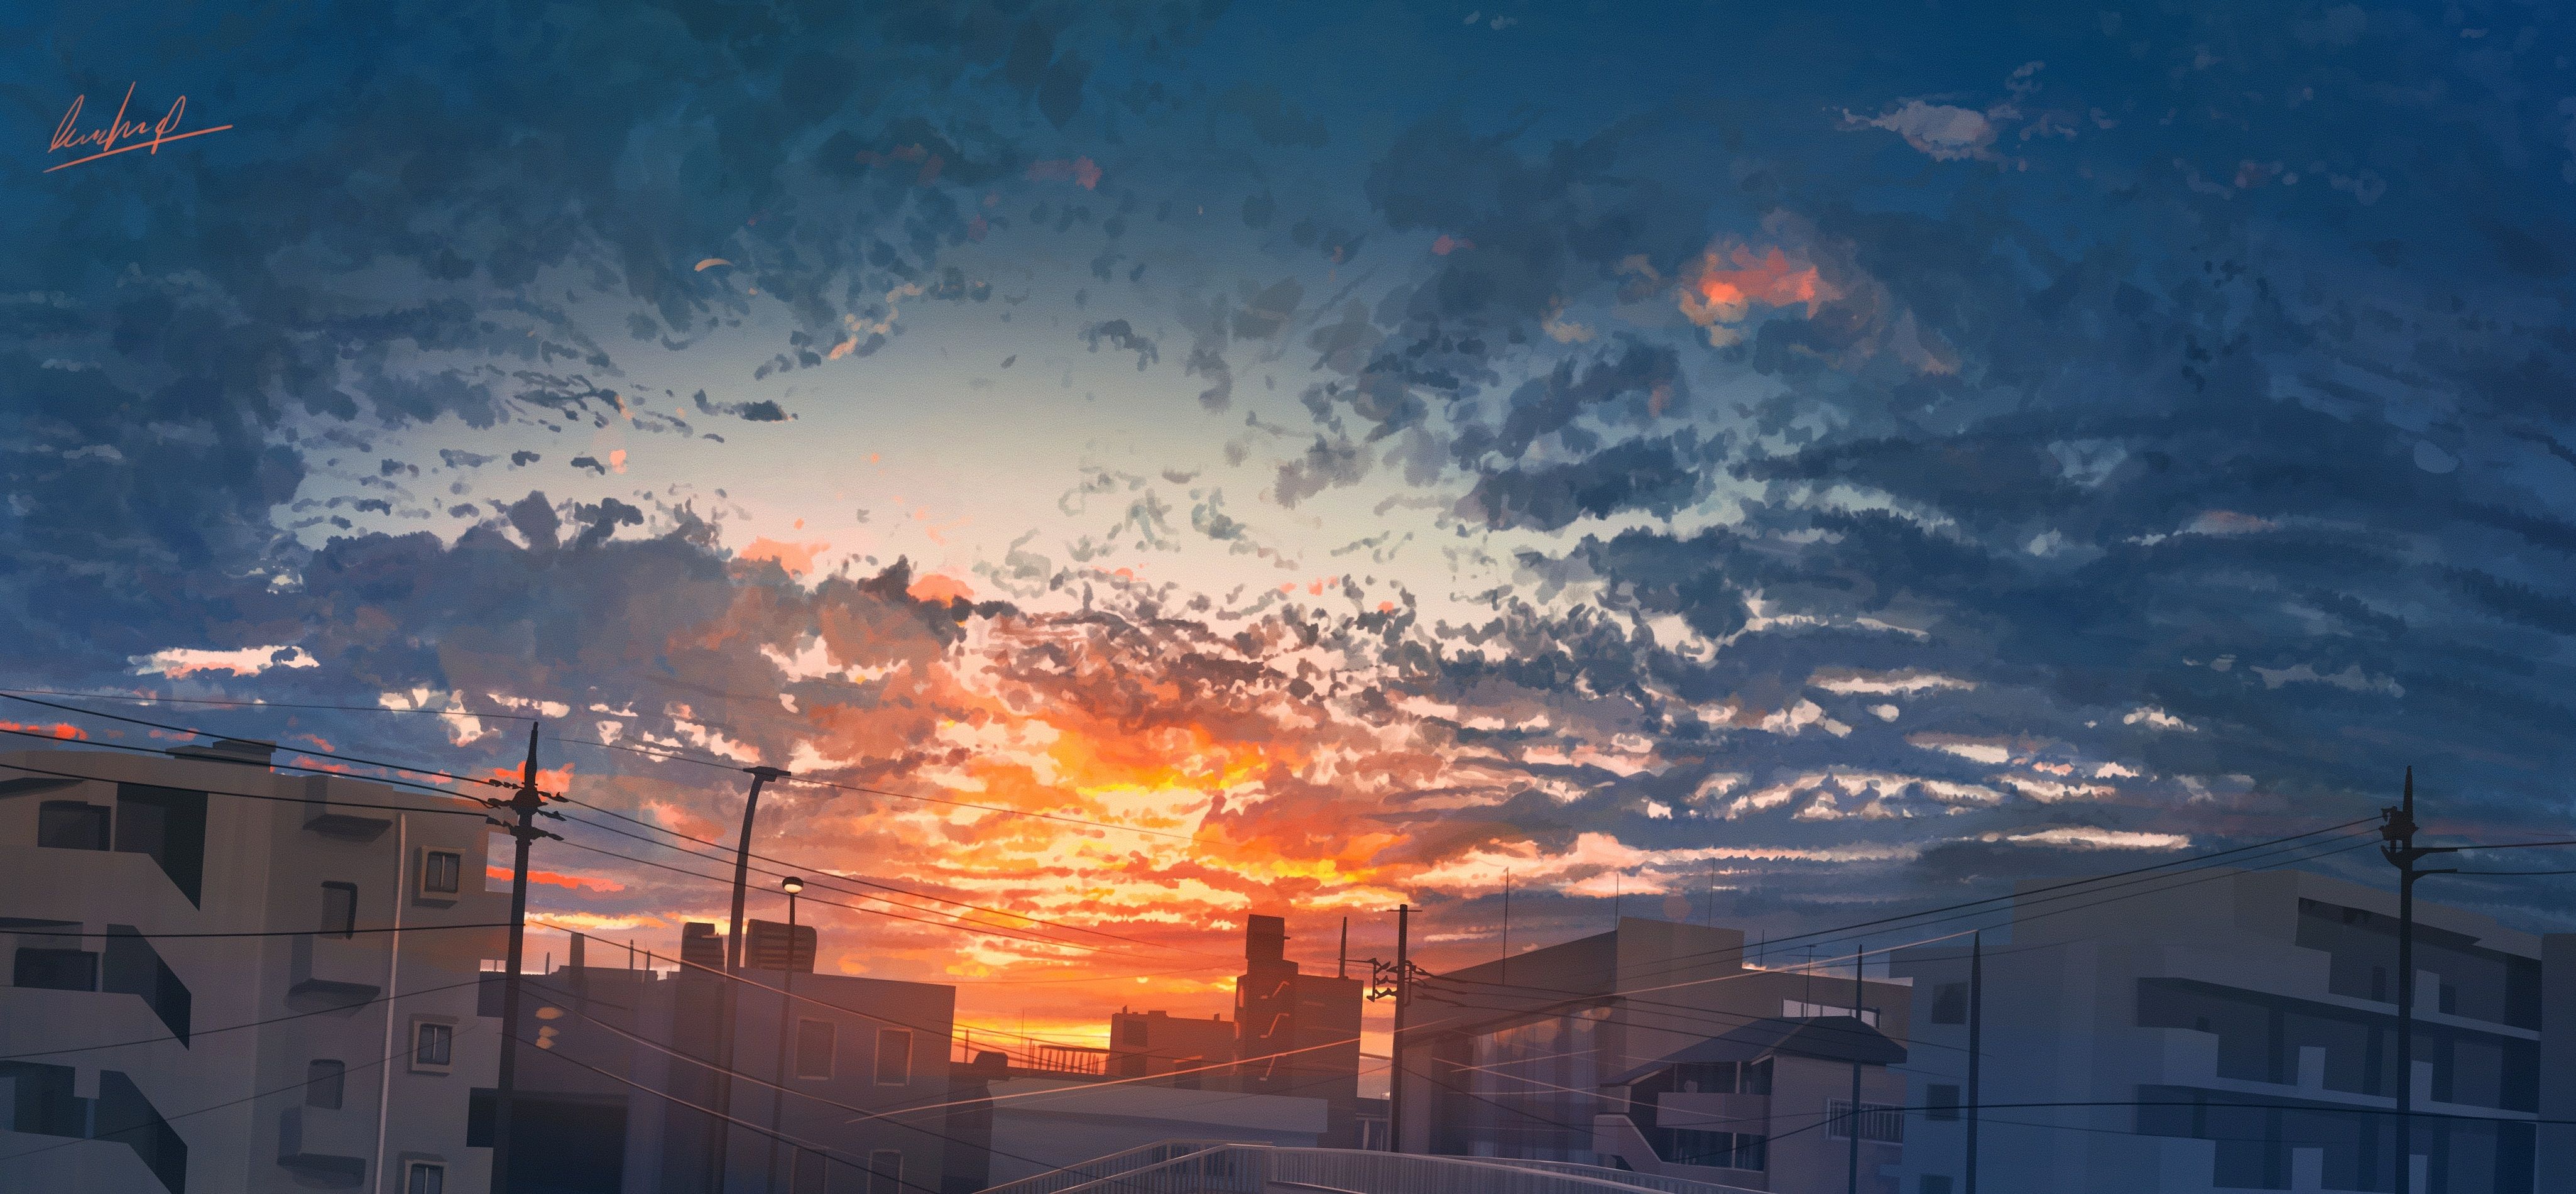 Download 4100x1900 Anime City, Sunset, Buildings, Clouds, Dawn, Scenic Wallpaper